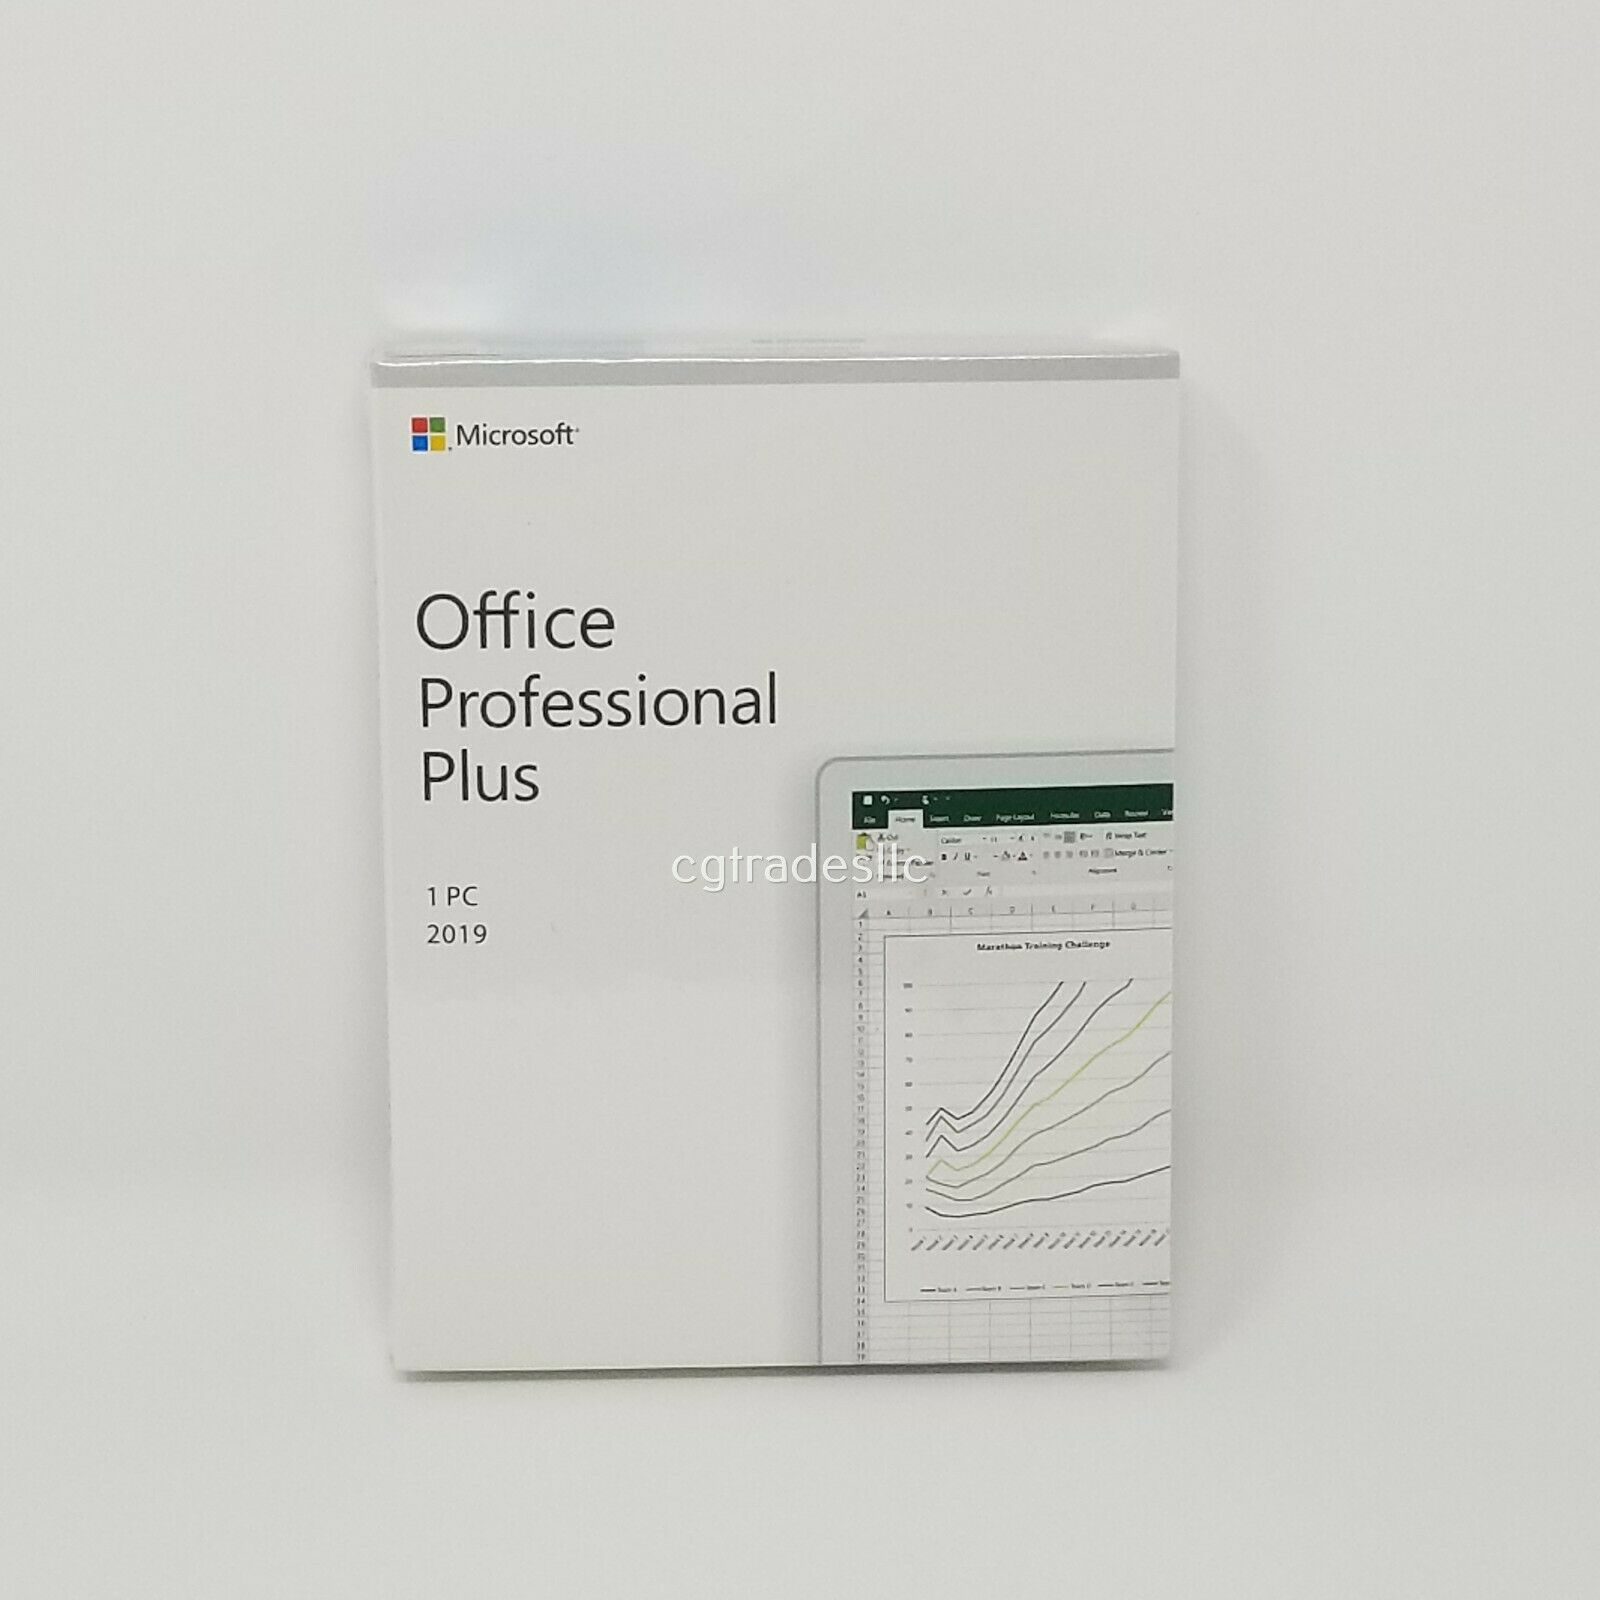 Microsoft Office 2019 Ms Professional Plus Pkc Medialess For Windows 10 1pc